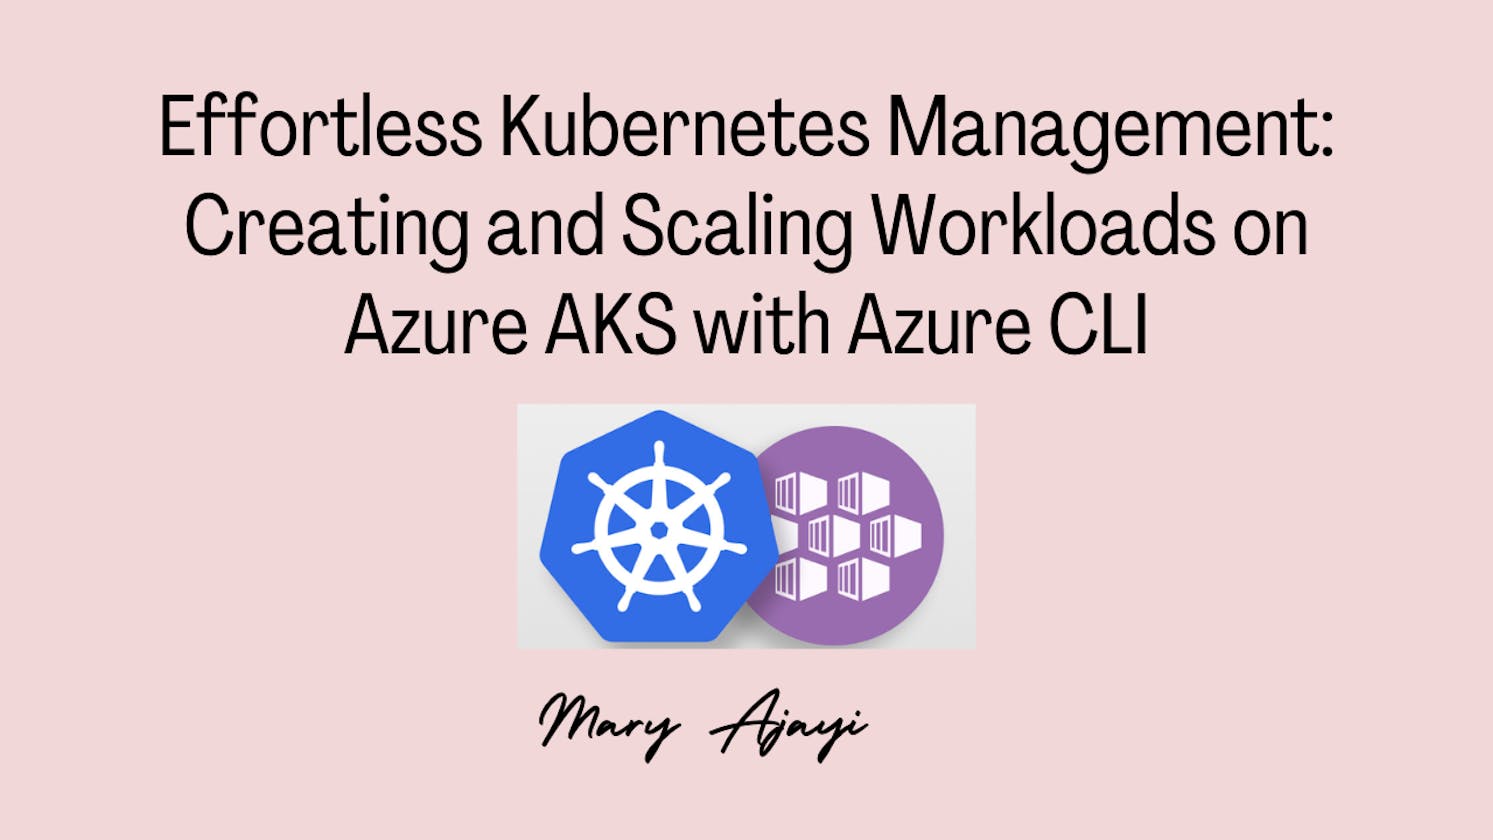 Effortless Kubernetes Management: Creating and Scaling Workloads on Azure AKS with Azure CLI